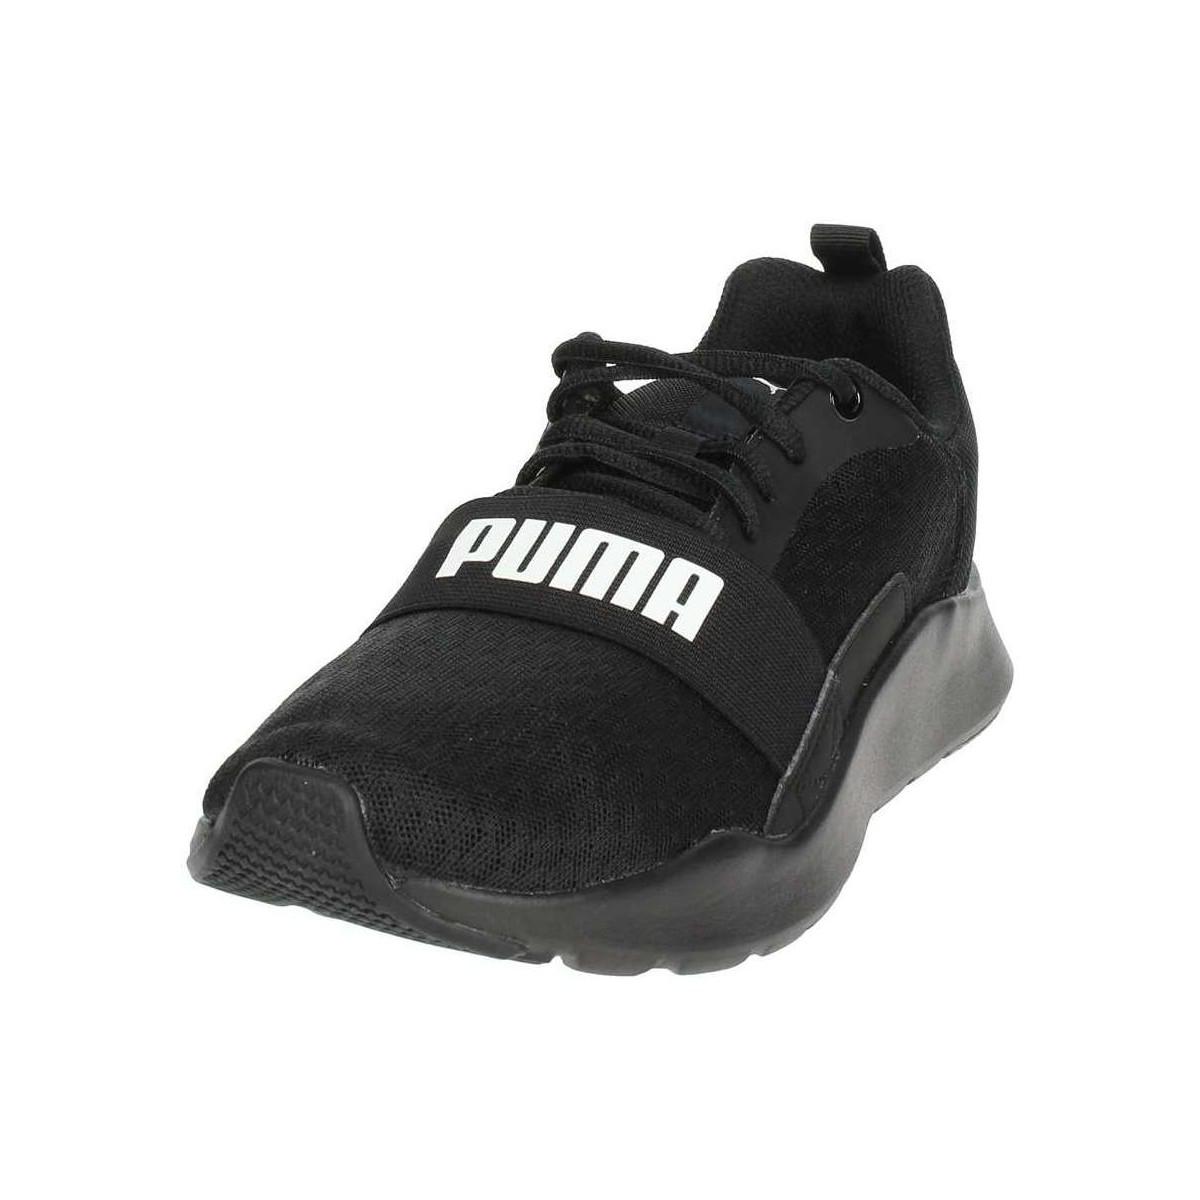 PUMA Wired Men's Shoes (trainers) In Black for Men - Lyst